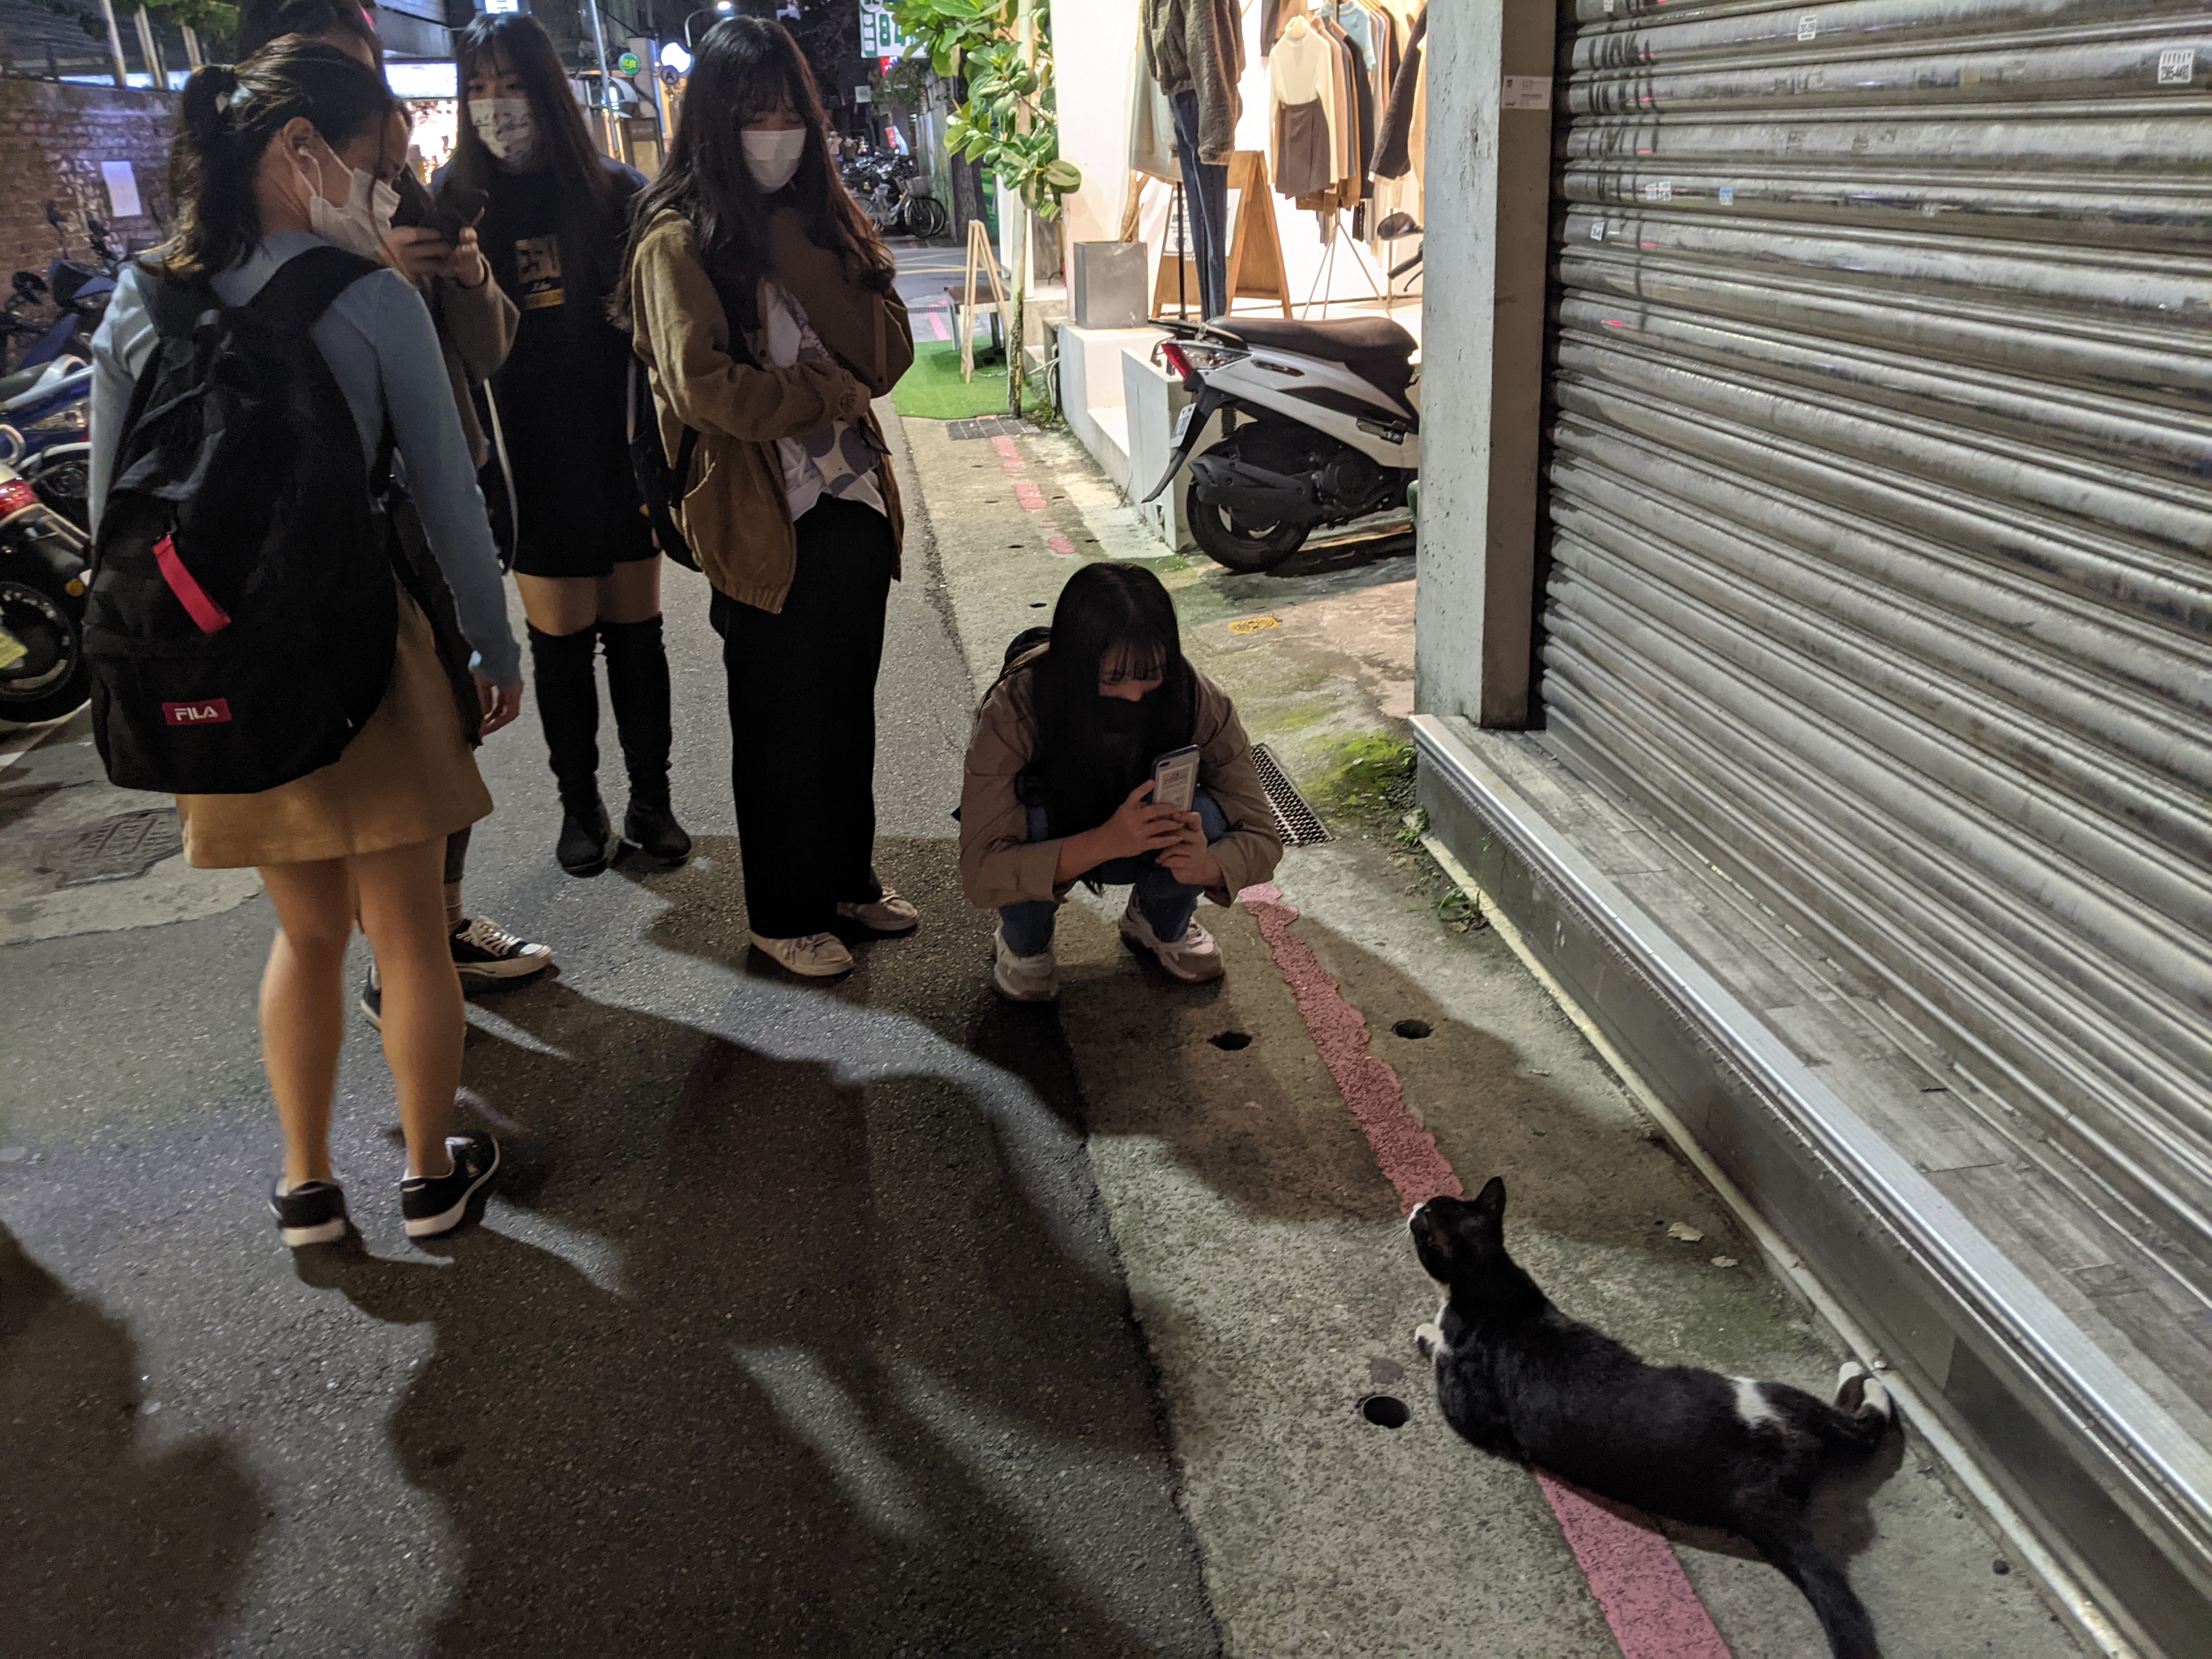 The same cat, with a whole crowd of people around it.